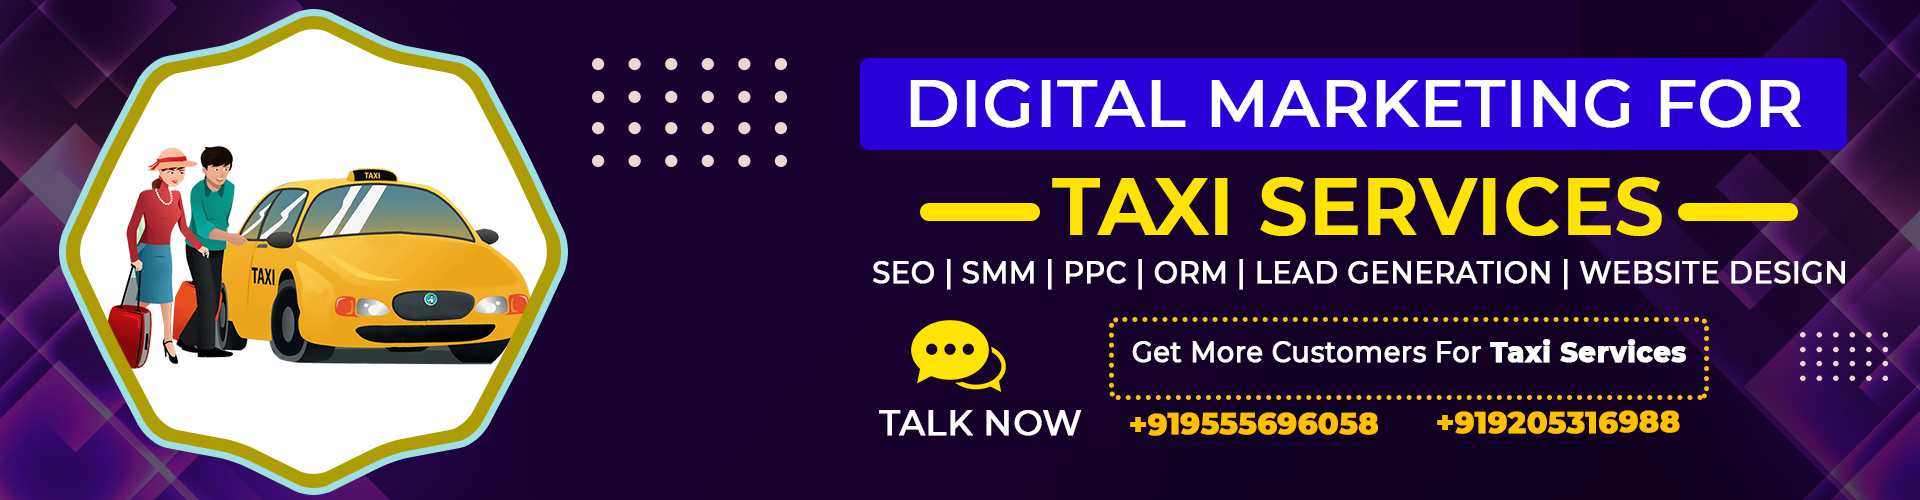 digital-marketing-for-taxi-services